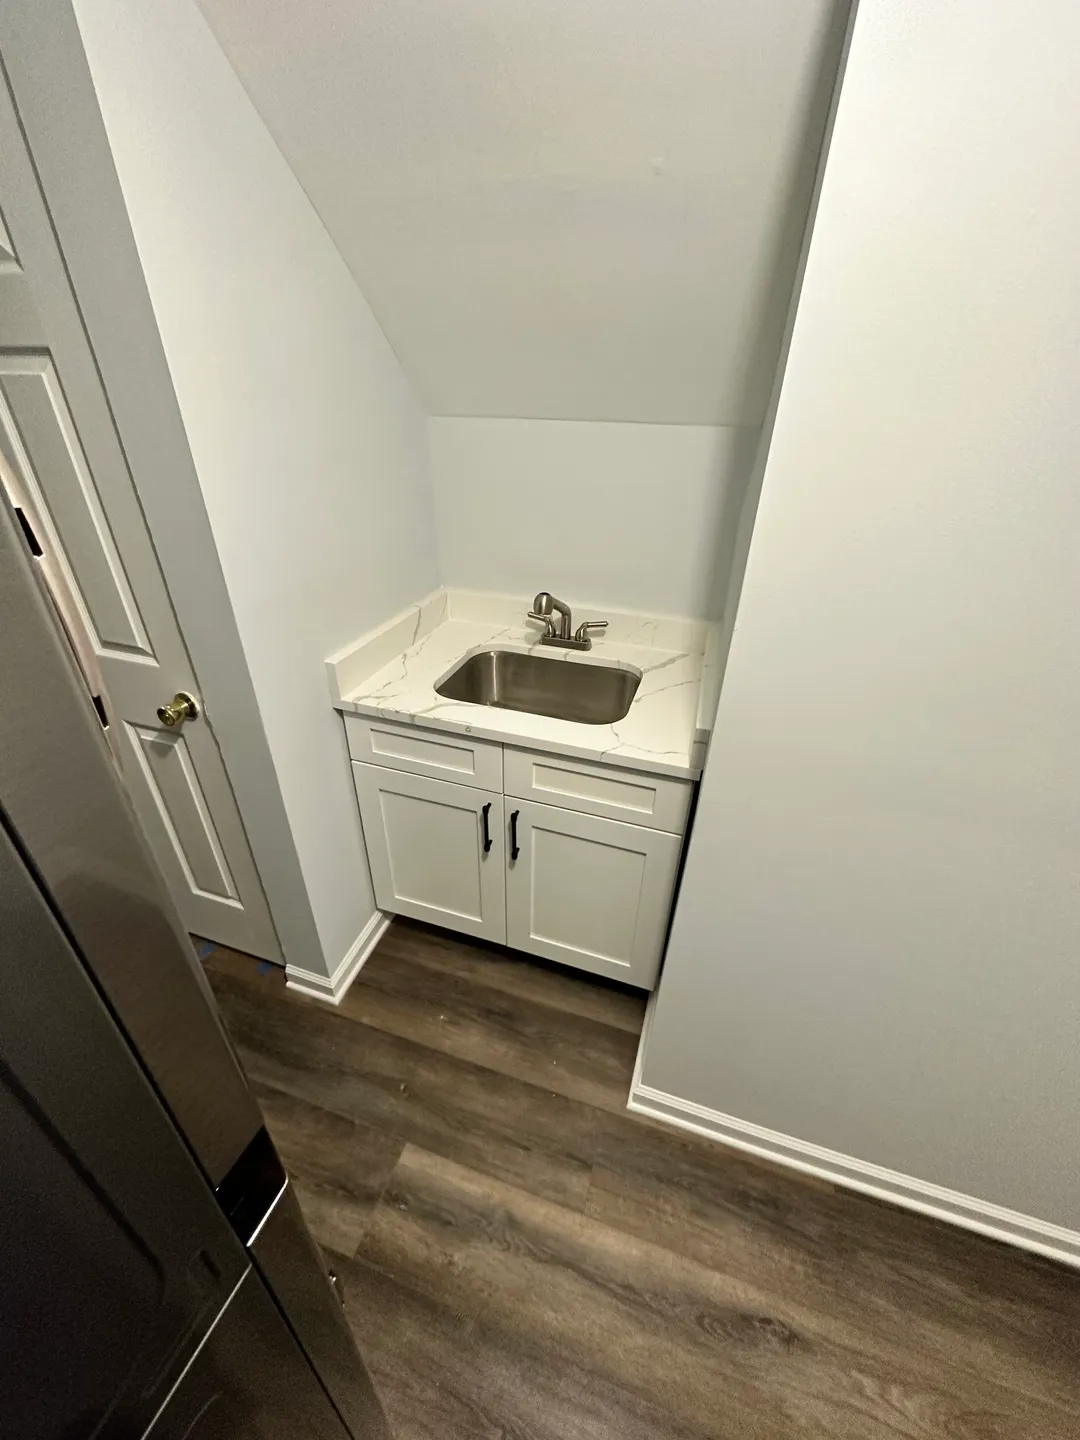 A sink and cabinet in the corner of a room.